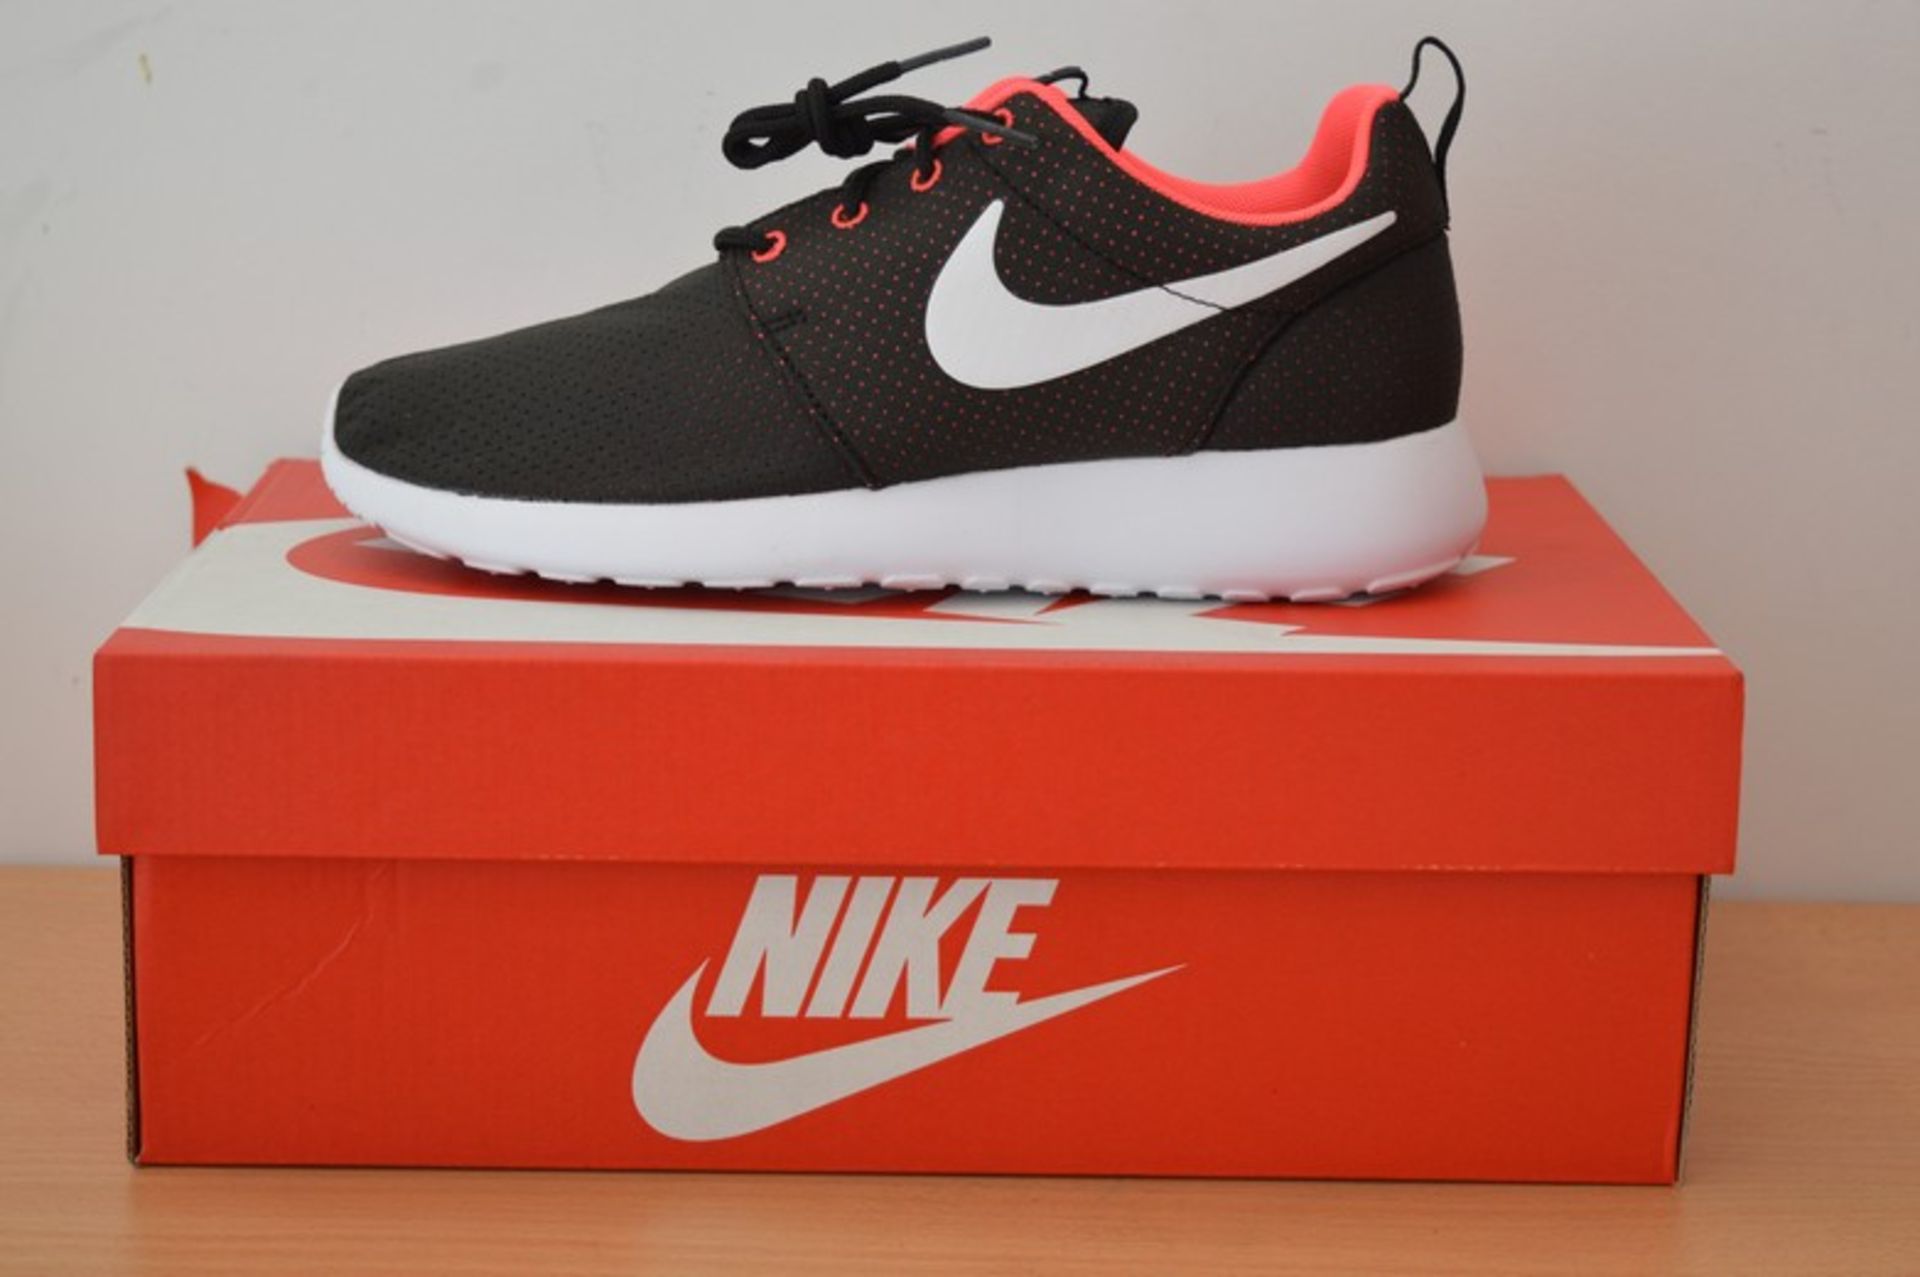 BOXED BRAND NEW NIKE ROSHRUN LADIES BLACK/WHITE AN PINK LADIES TRAINERS IN UK SIZE 5 RRP £55 (